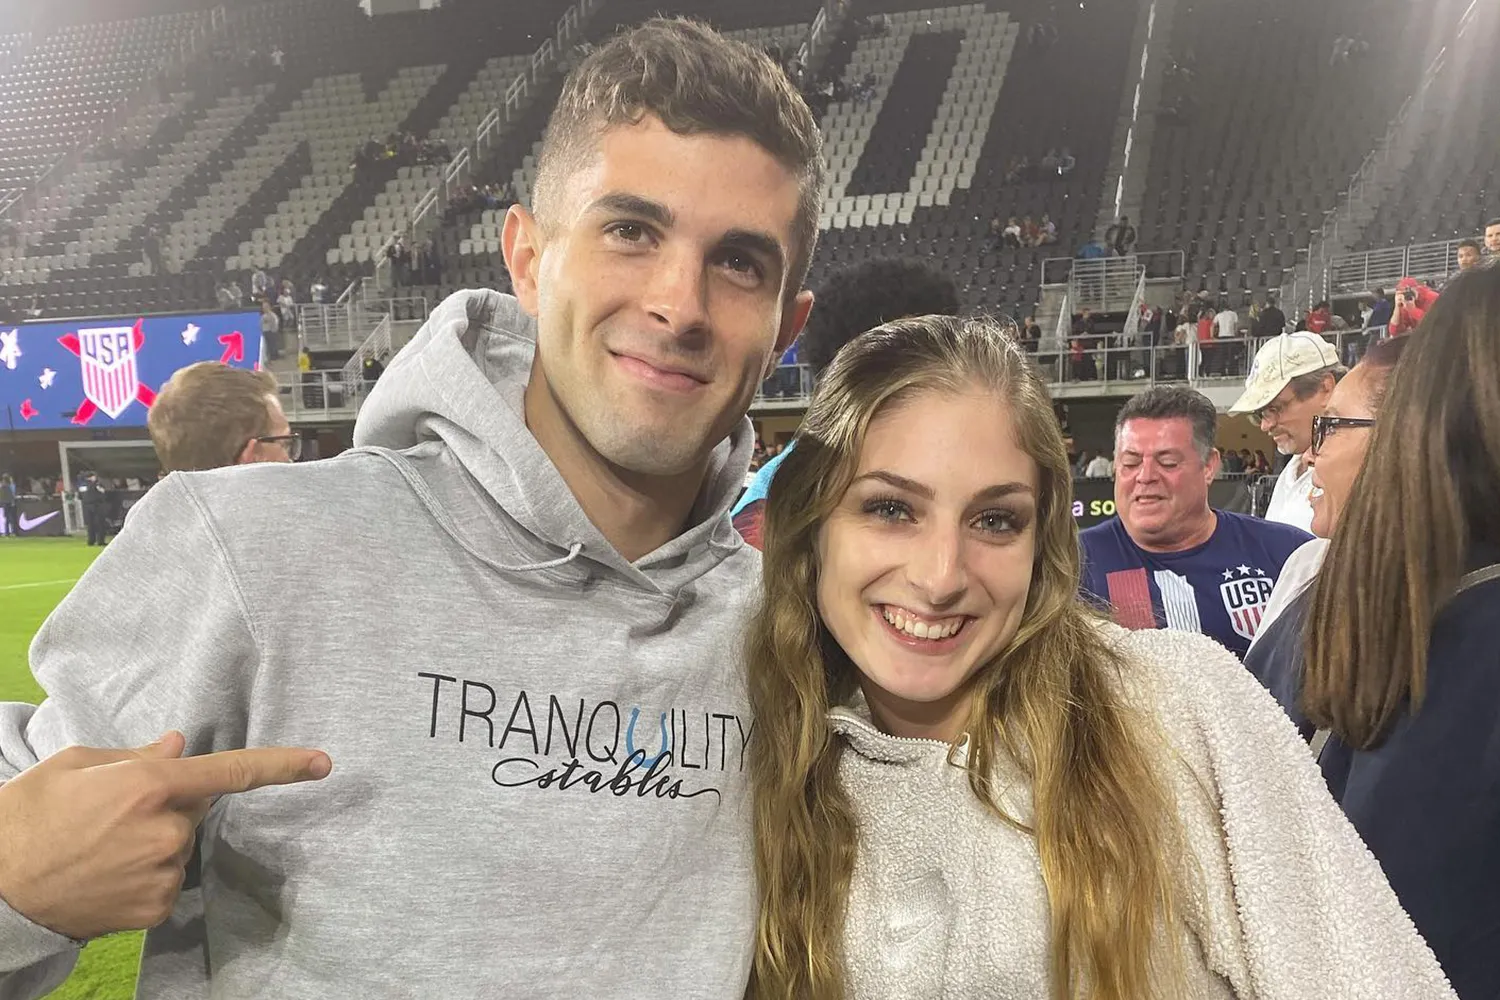 Christian Pulisic, Devyn Pulisic, Pulisic Family, Soccer Star, Equestrian Sports, Tranquility Stables, Sibling Bond, Sports Journey, Mental Health, Family Values,